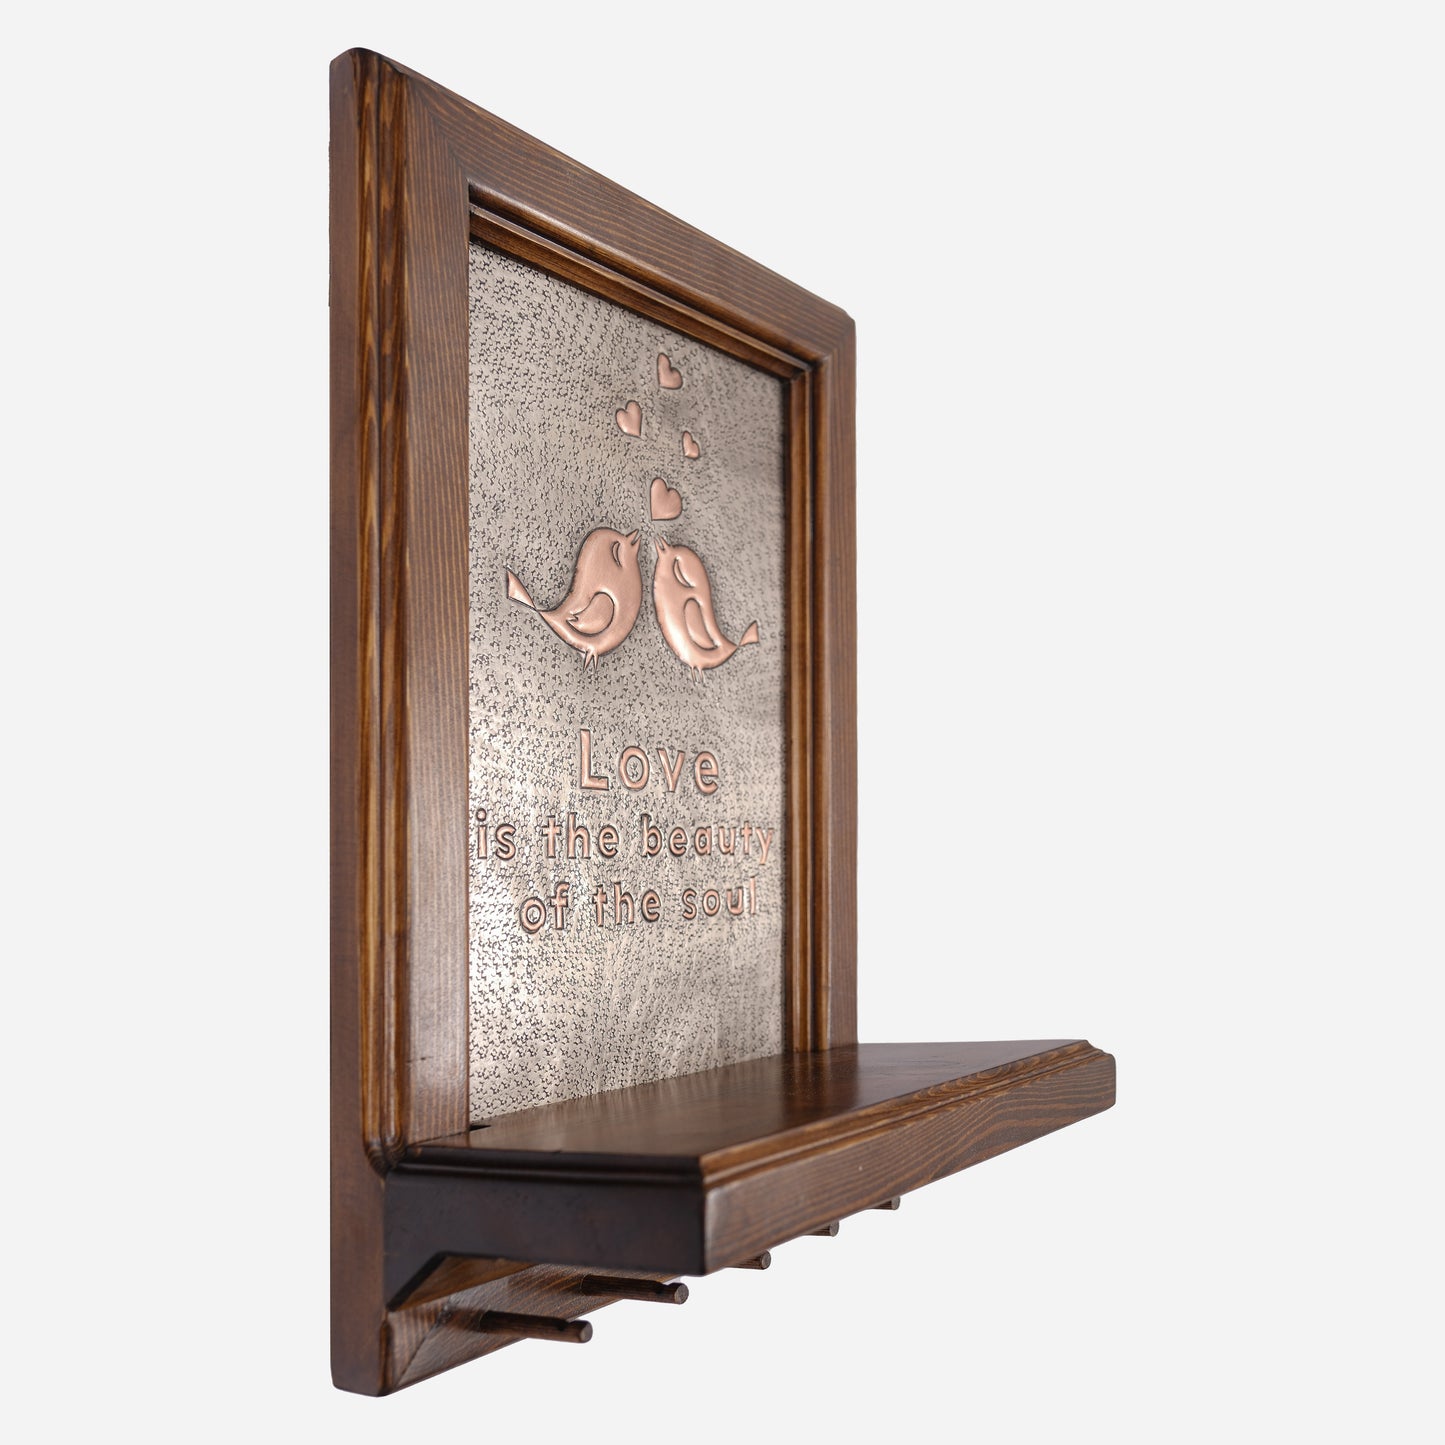 Copper Wall Mounted Shelf and Key Holder